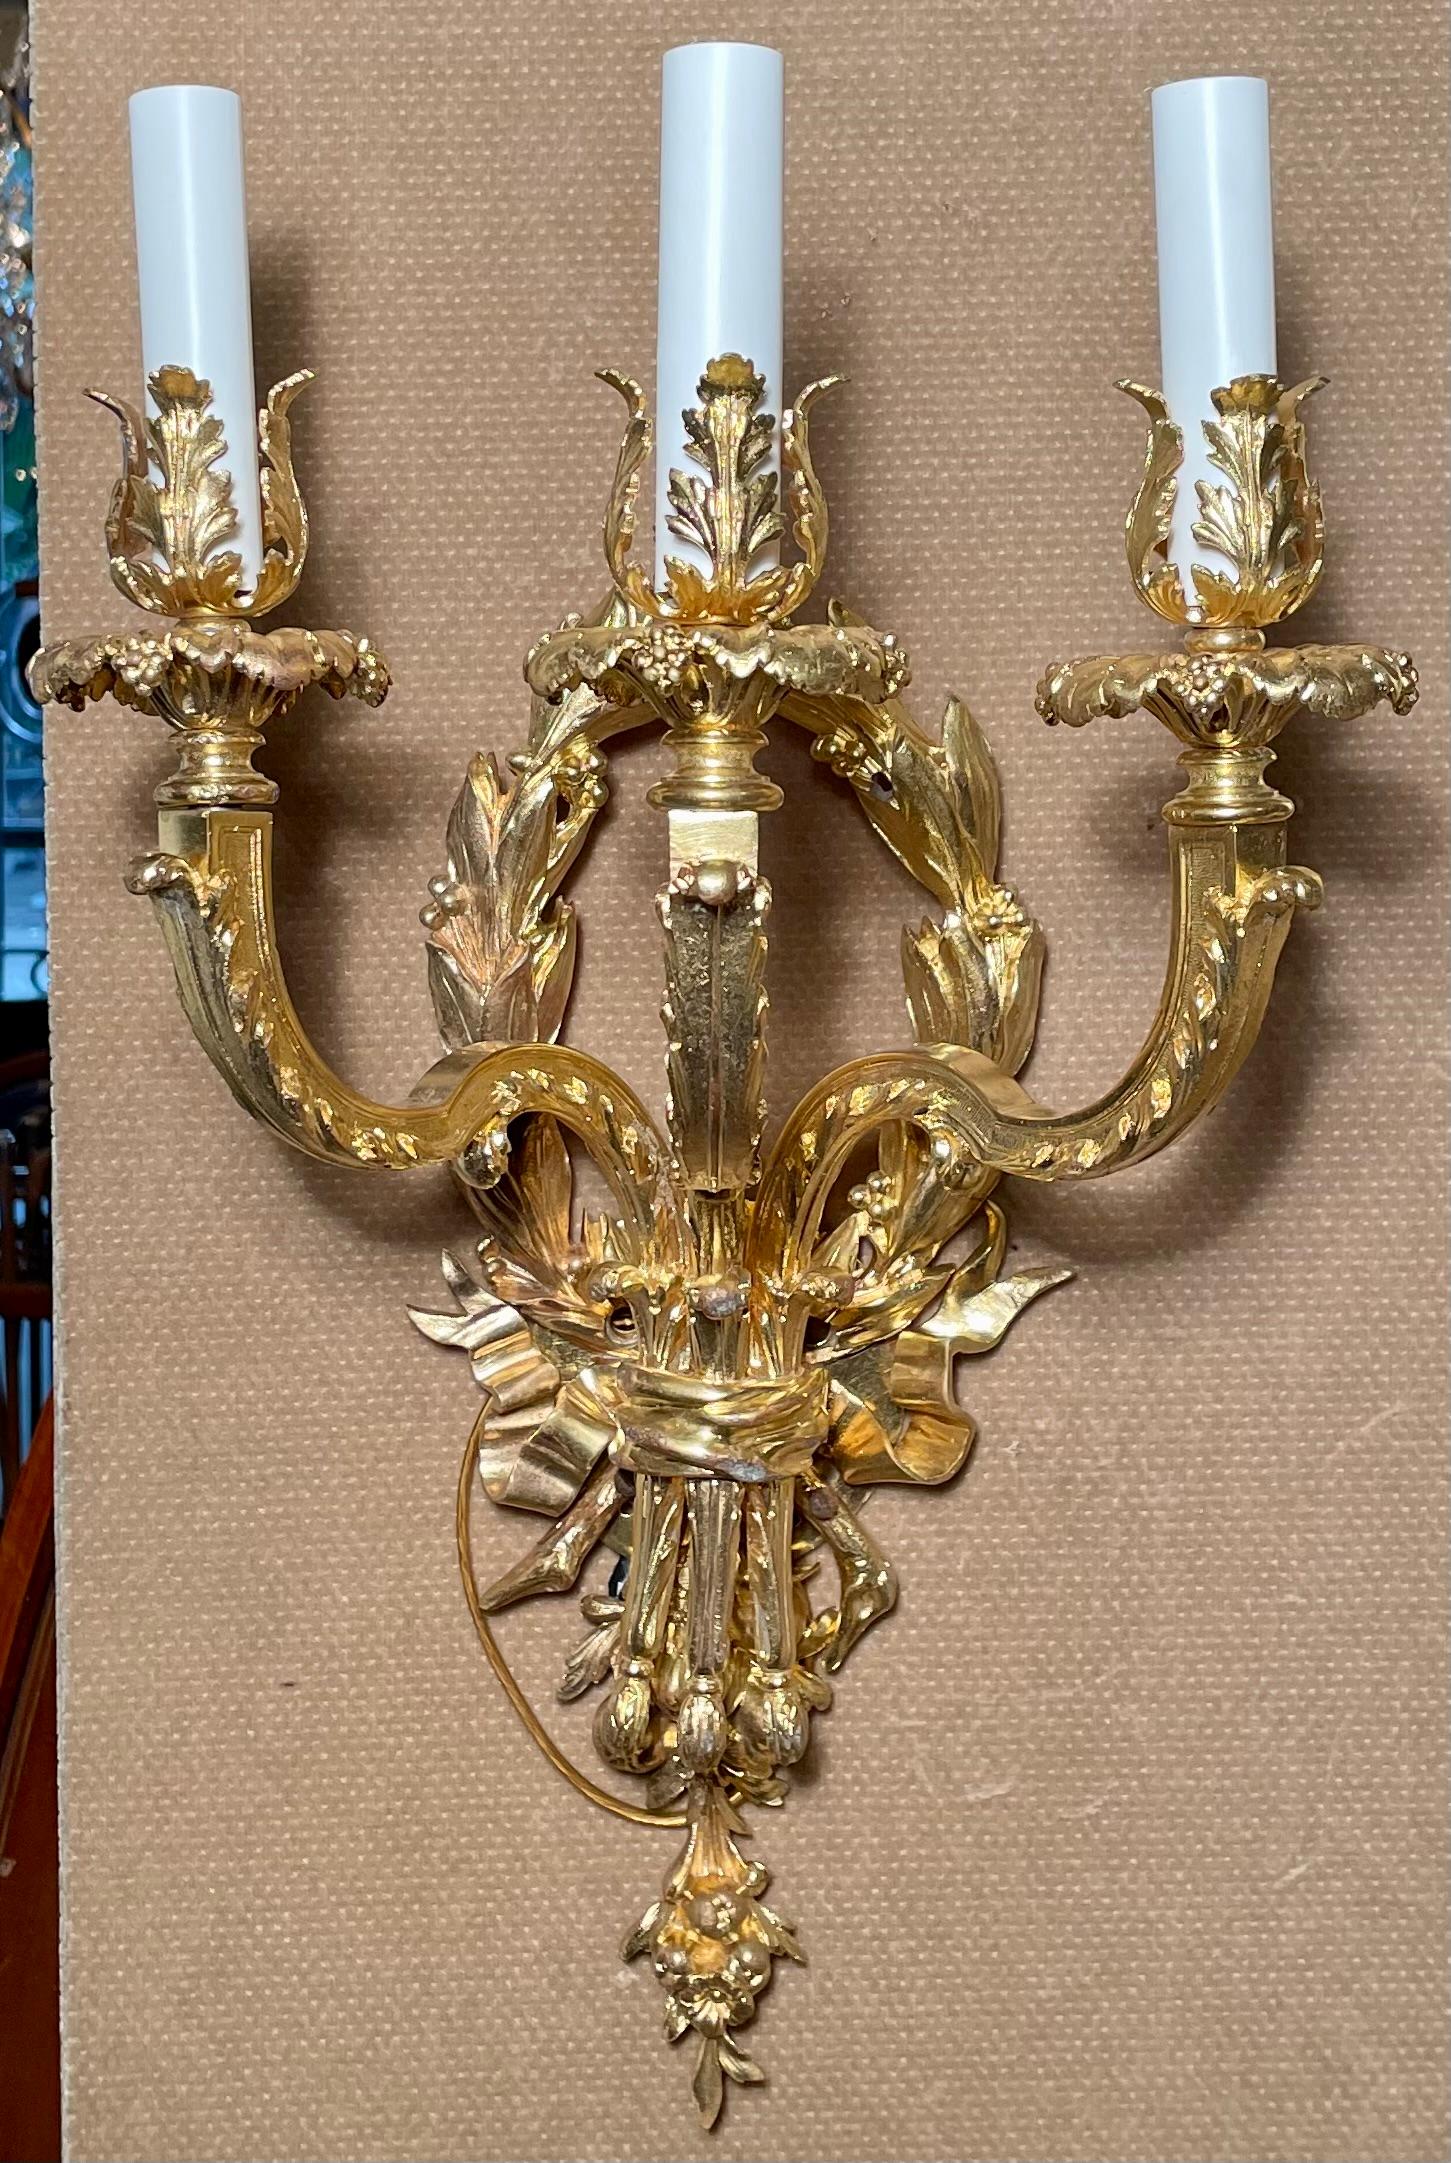 Pair antique french bronze d'ore 3 light wall sconces, circa 1890s.